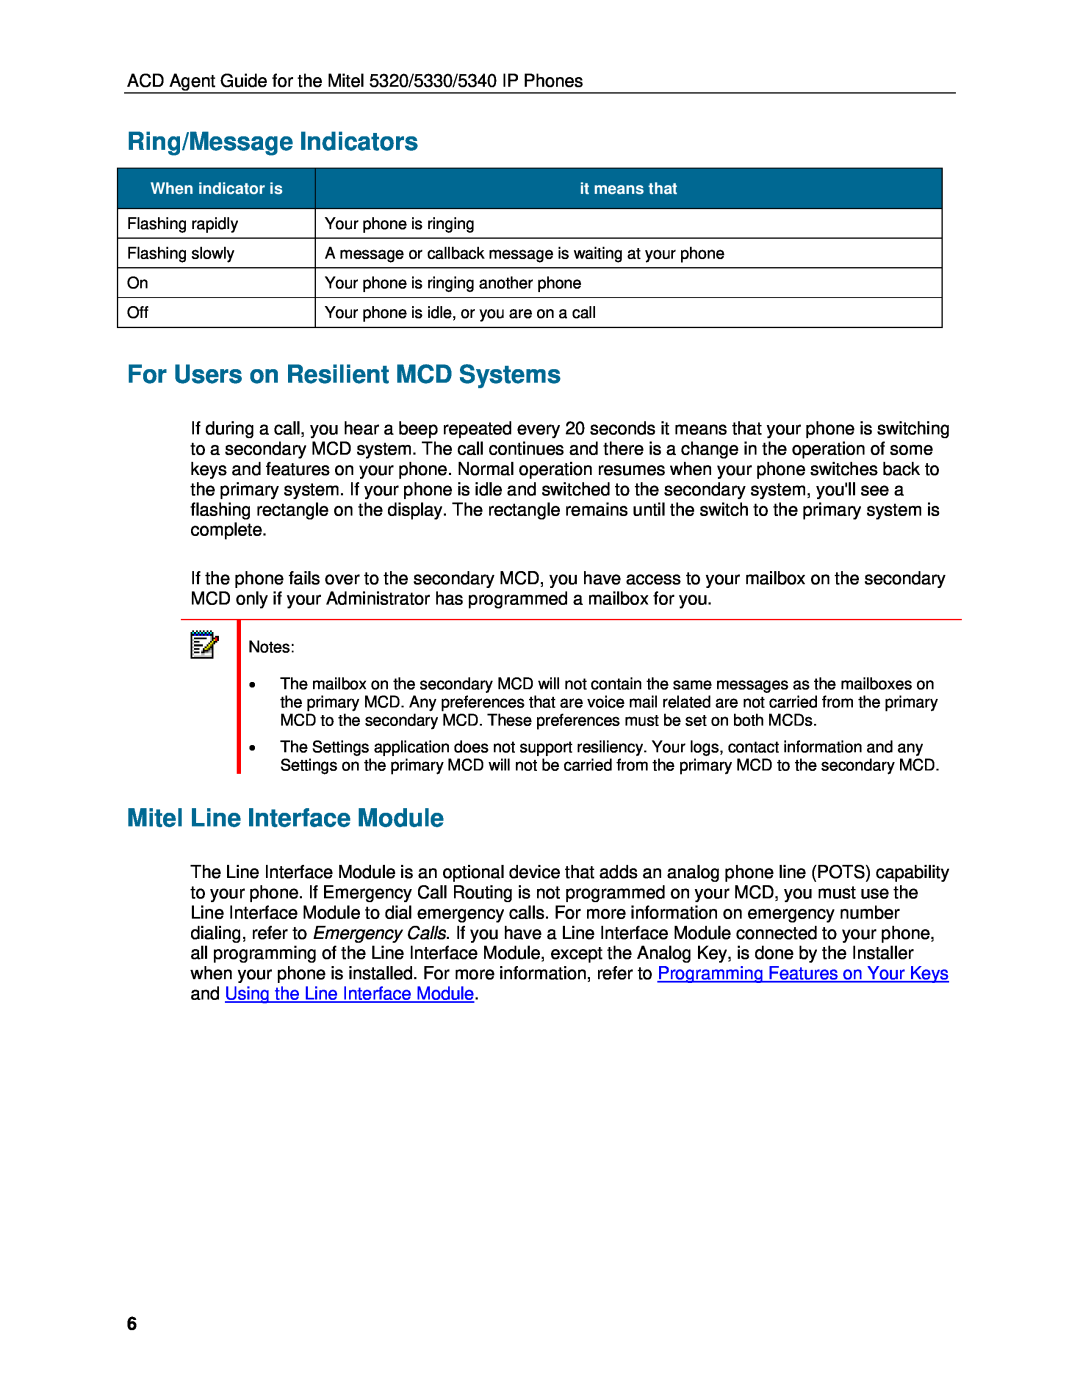 Mitel 5320 Ring/Message Indicators, For Users on Resilient MCD Systems, Mitel Line Interface Module, When indicator is 